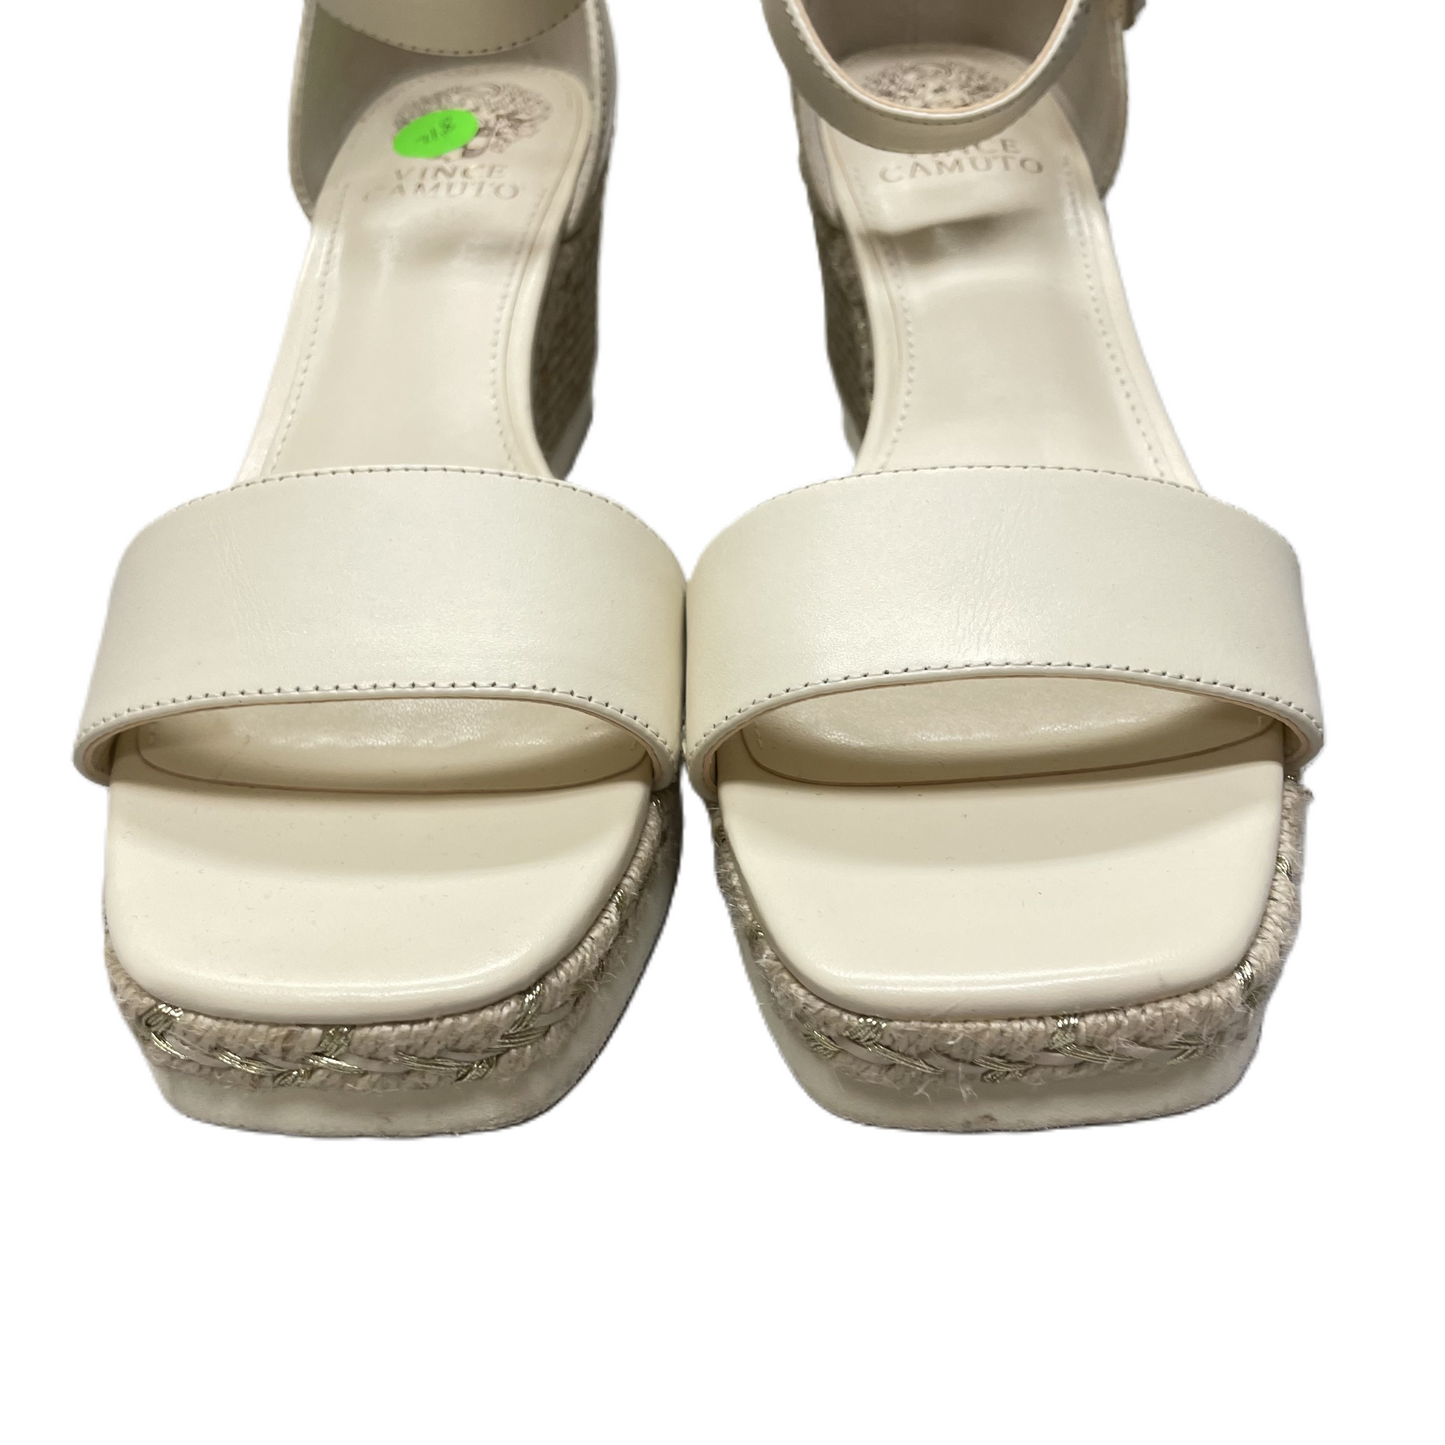 Cream Sandals Heels Wedge By Vince Camuto, Size: 8.5